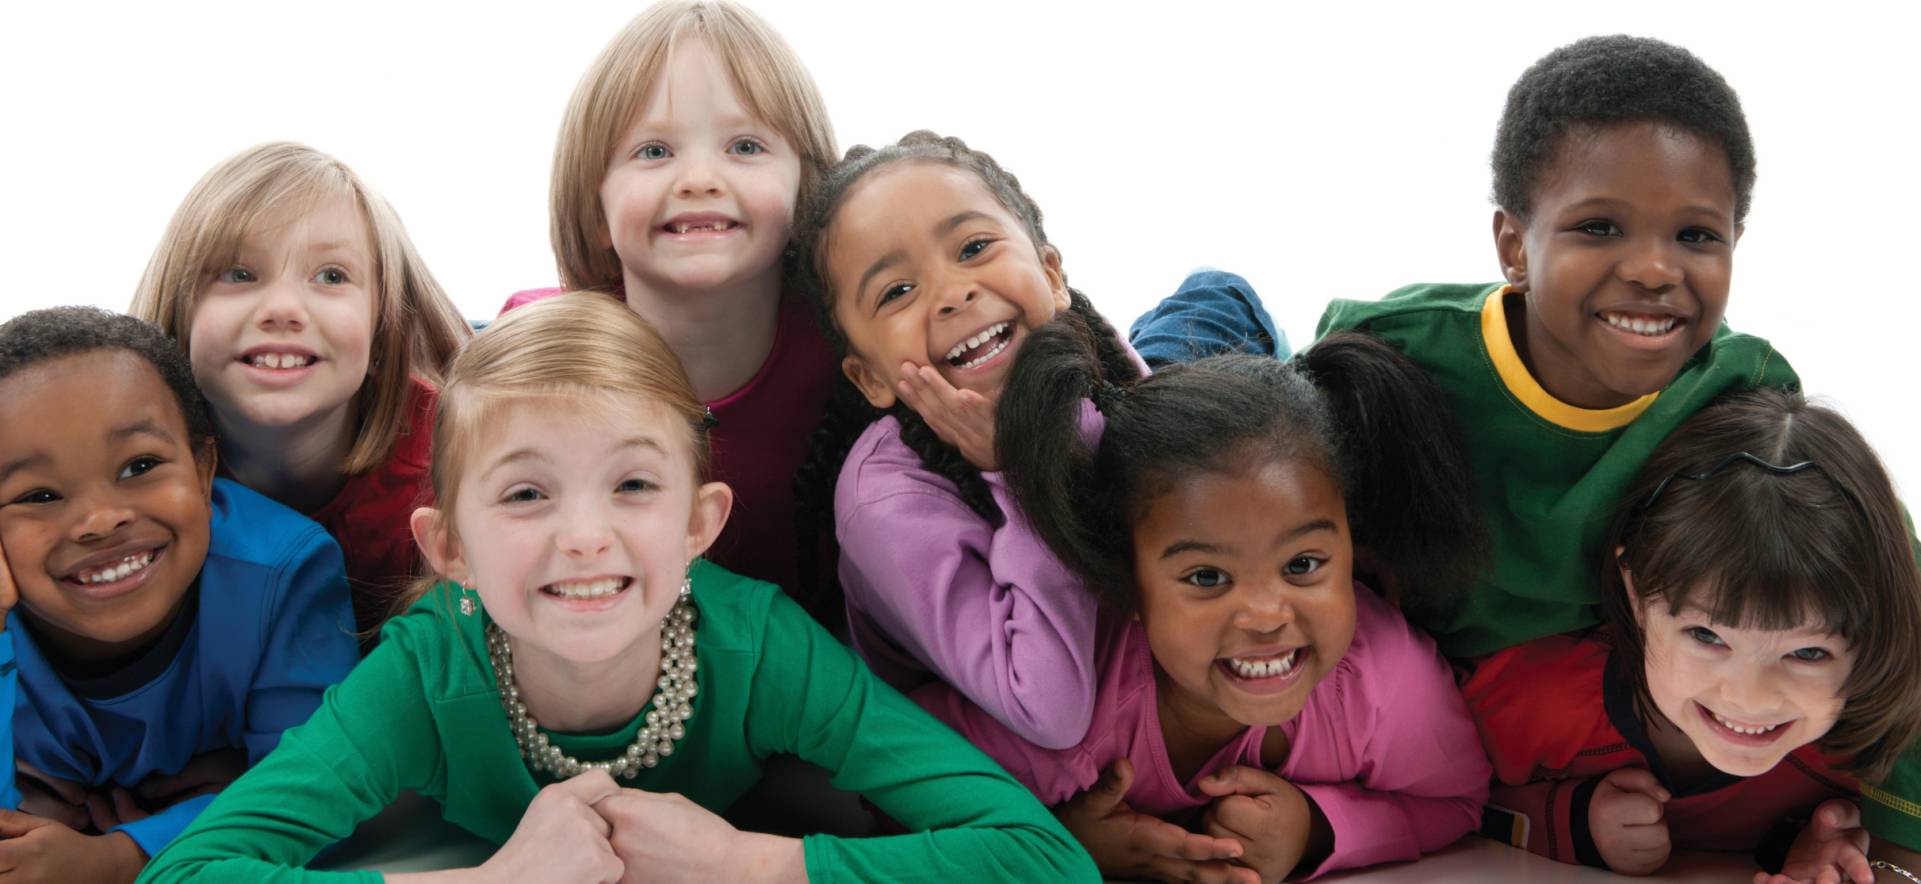 A diverse group of children on a white background